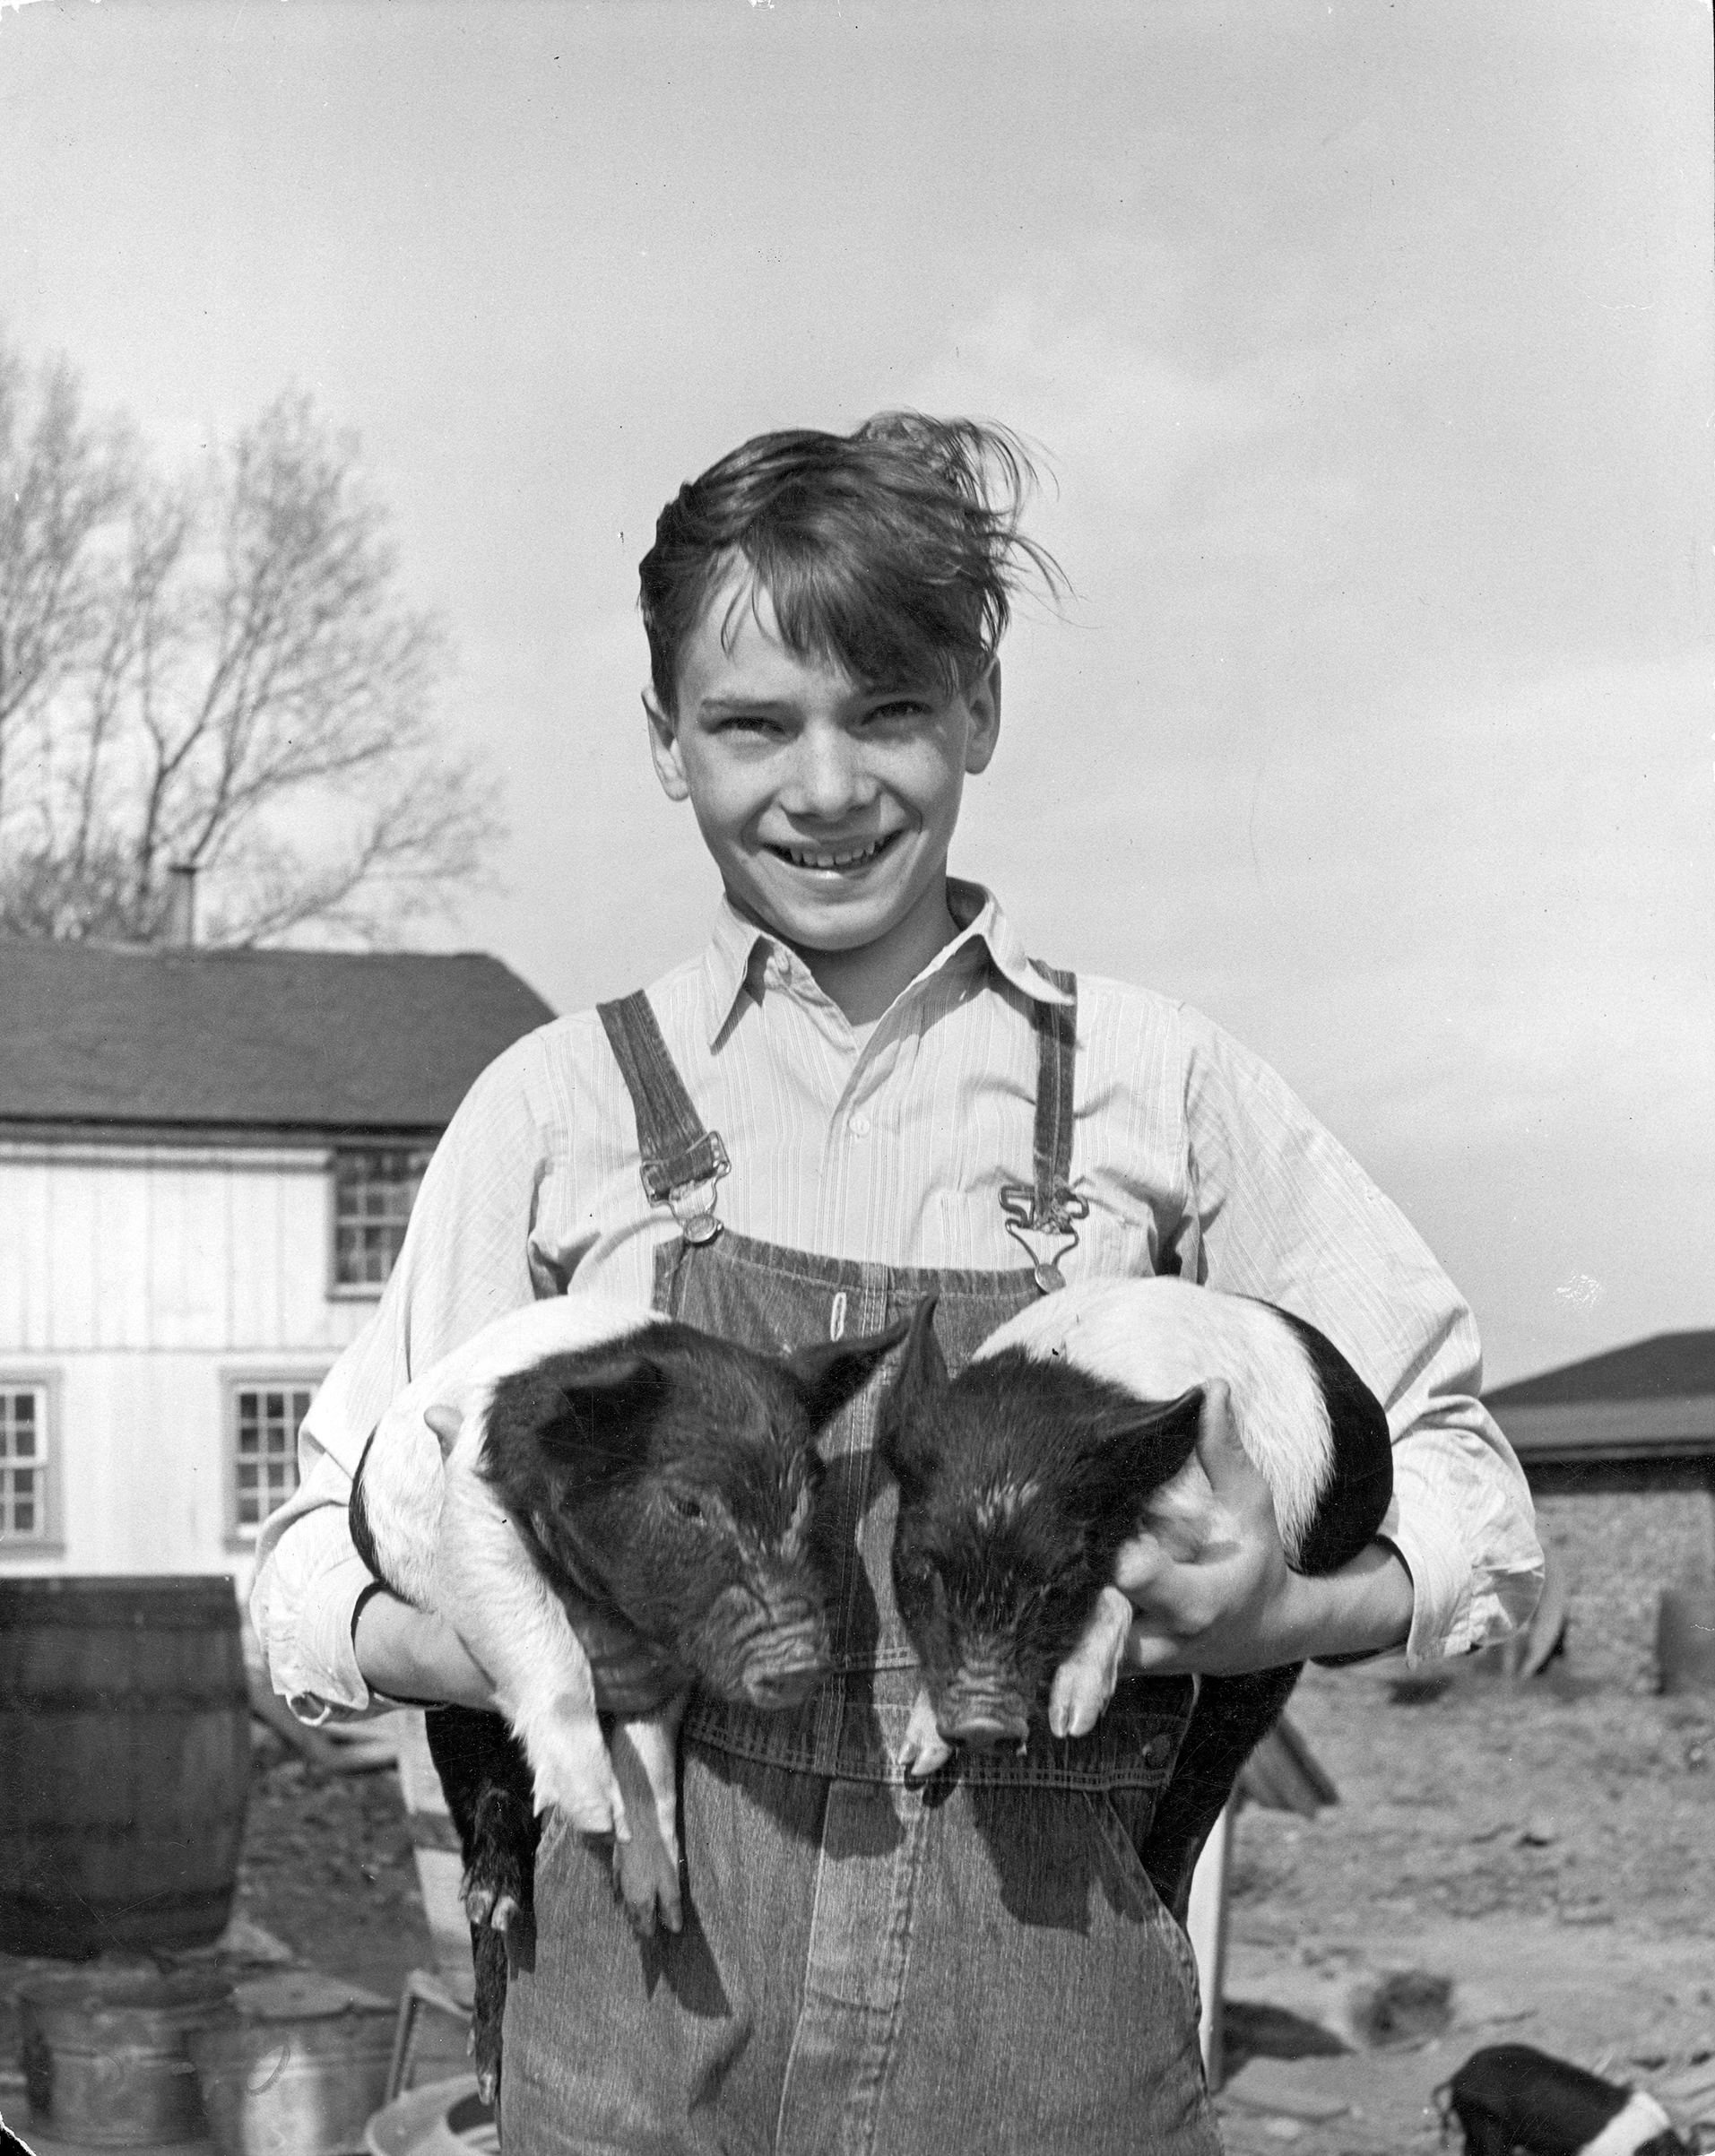 A farmer's son holding a pair of Hampshire piglets on farm in Lancaster County, Pennsylvania, 1943.